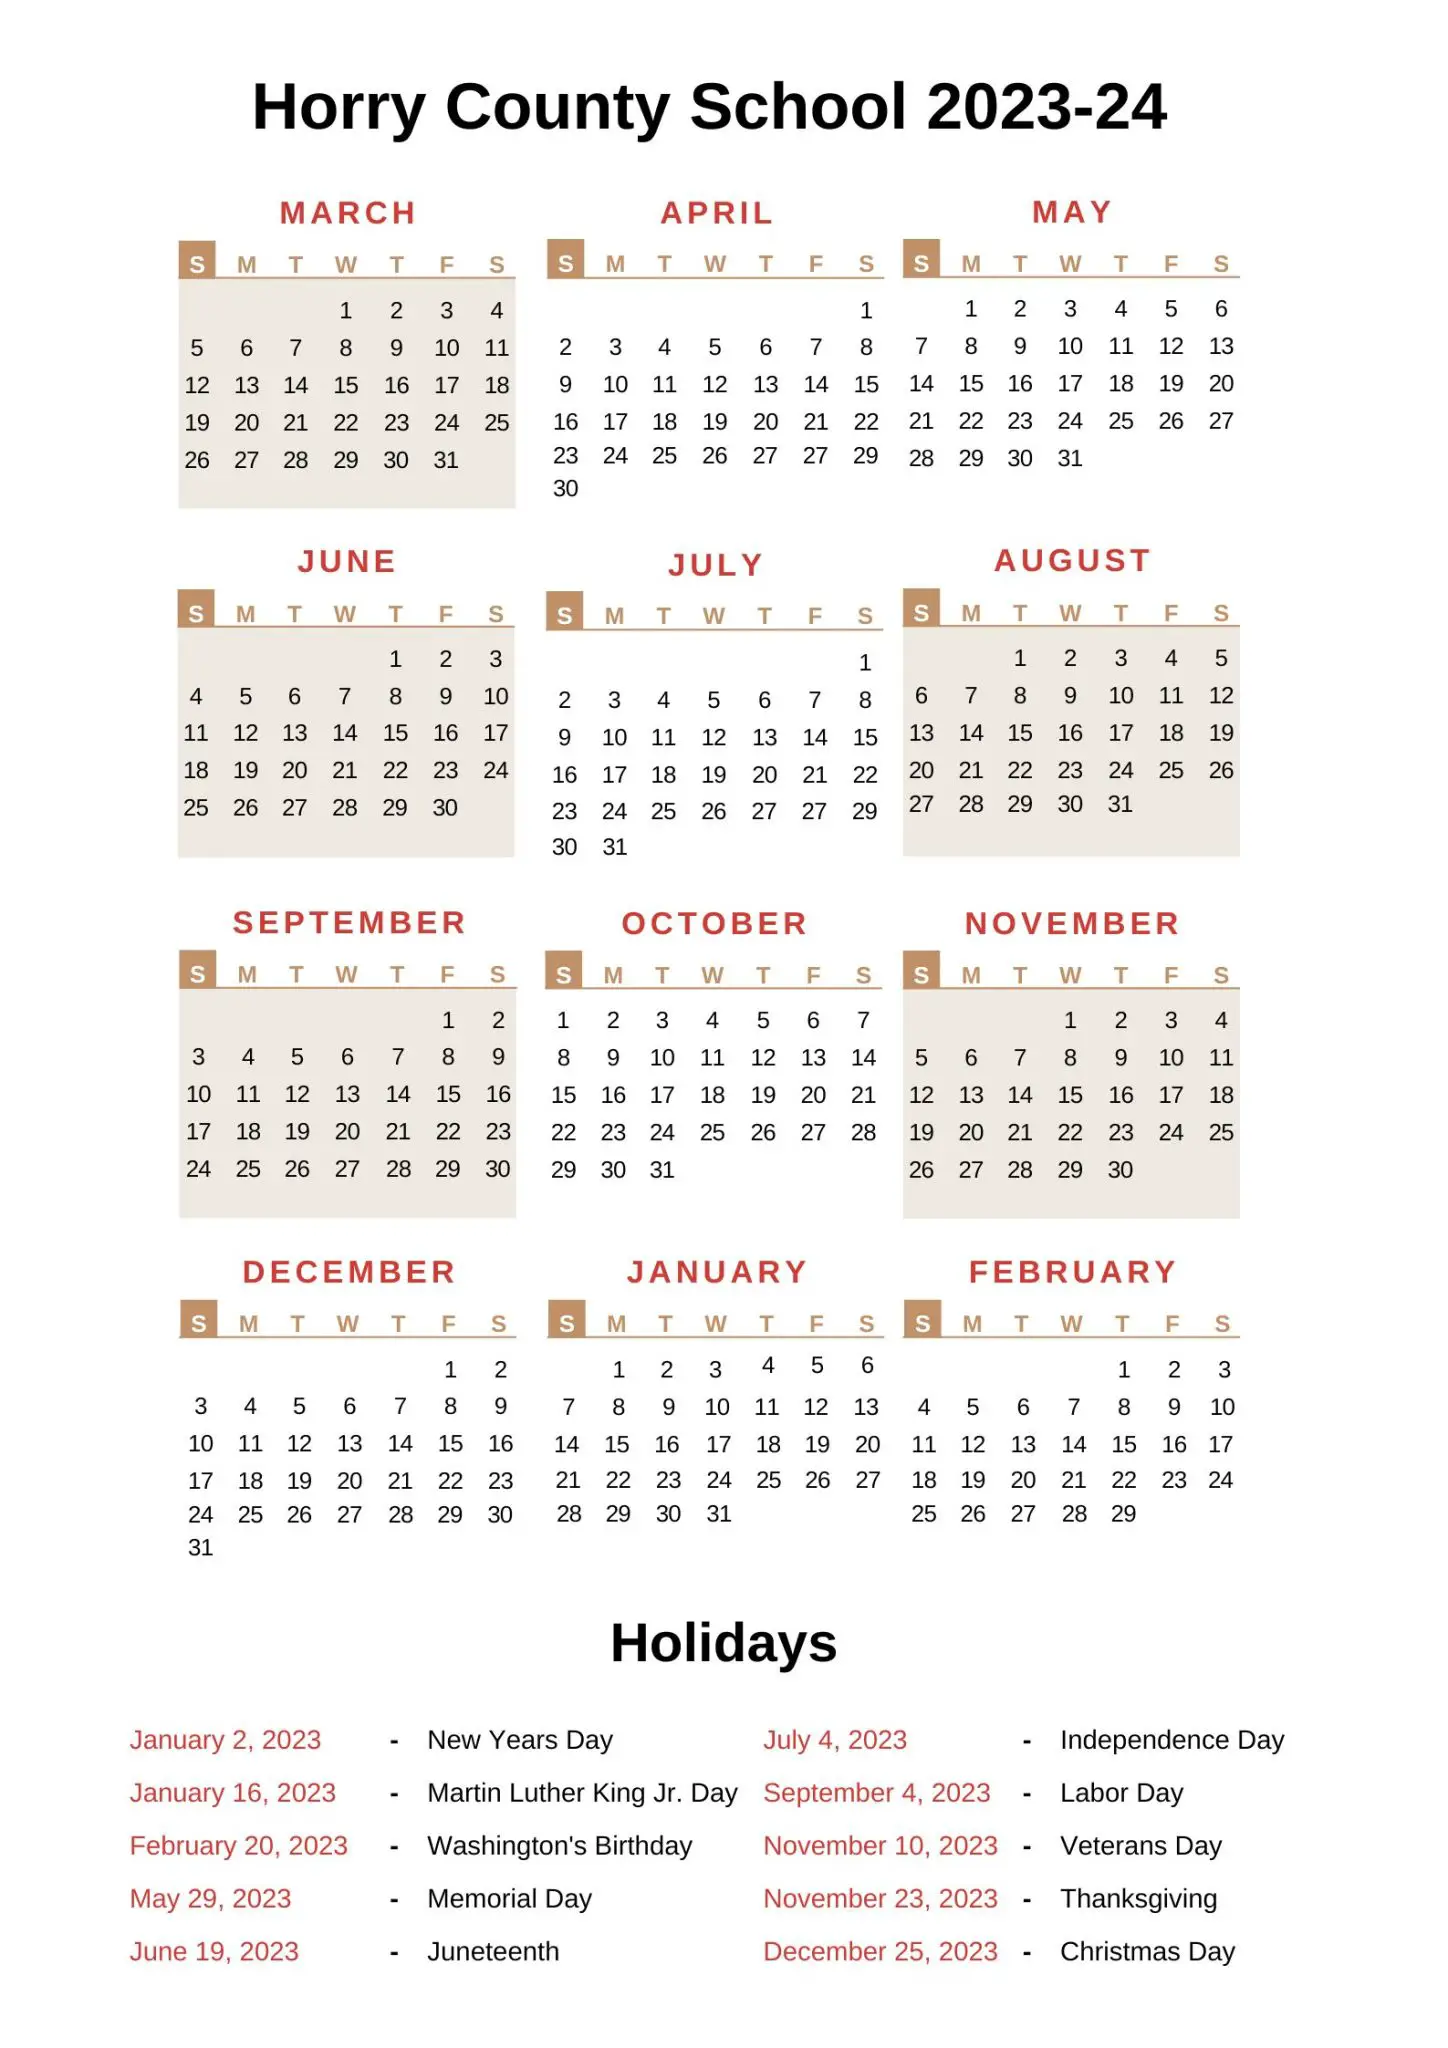 Horry County Schools Calendar 2023-24 with Holidays